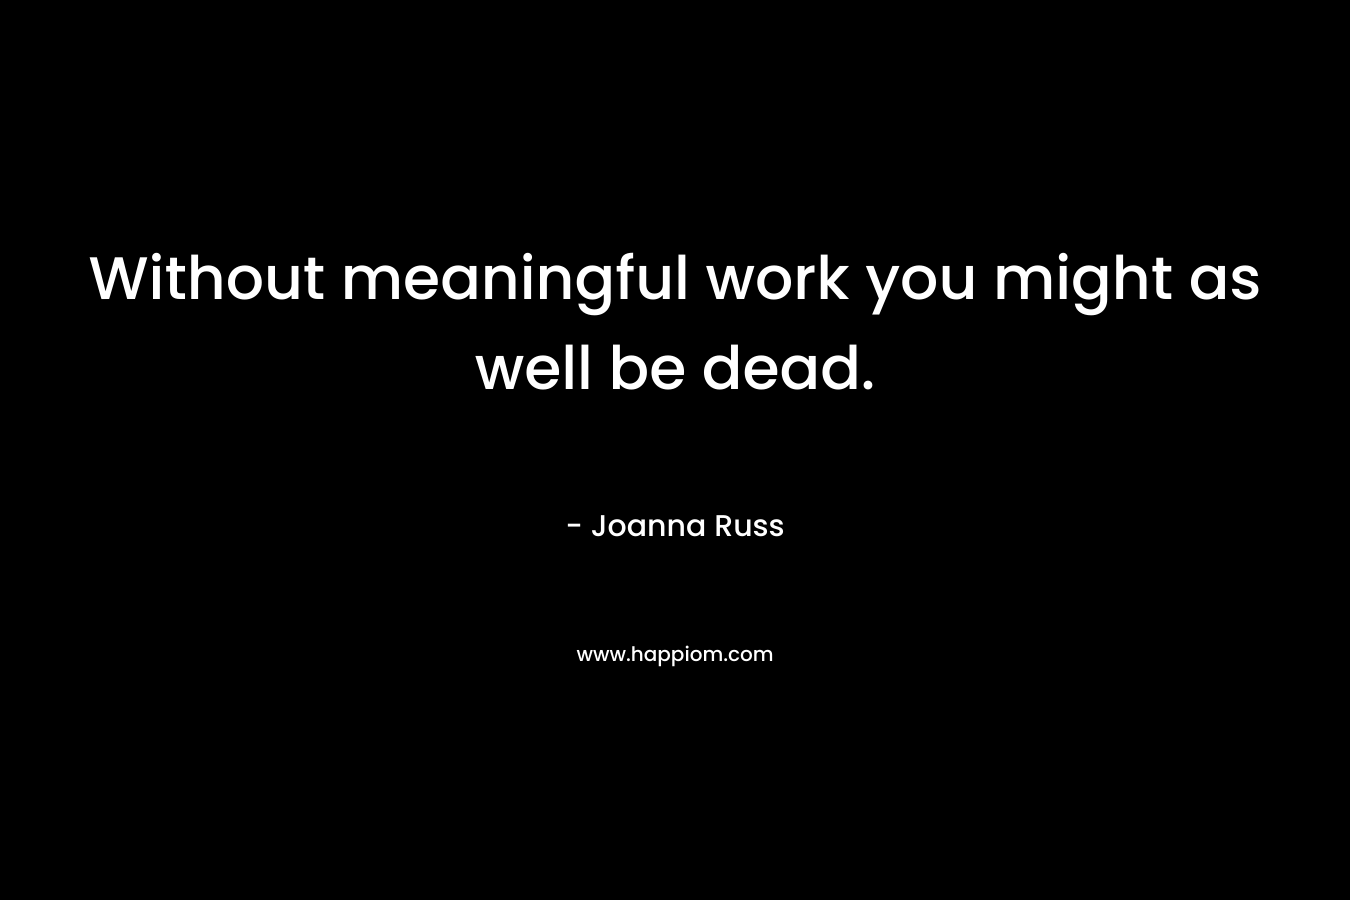 Without meaningful work you might as well be dead.